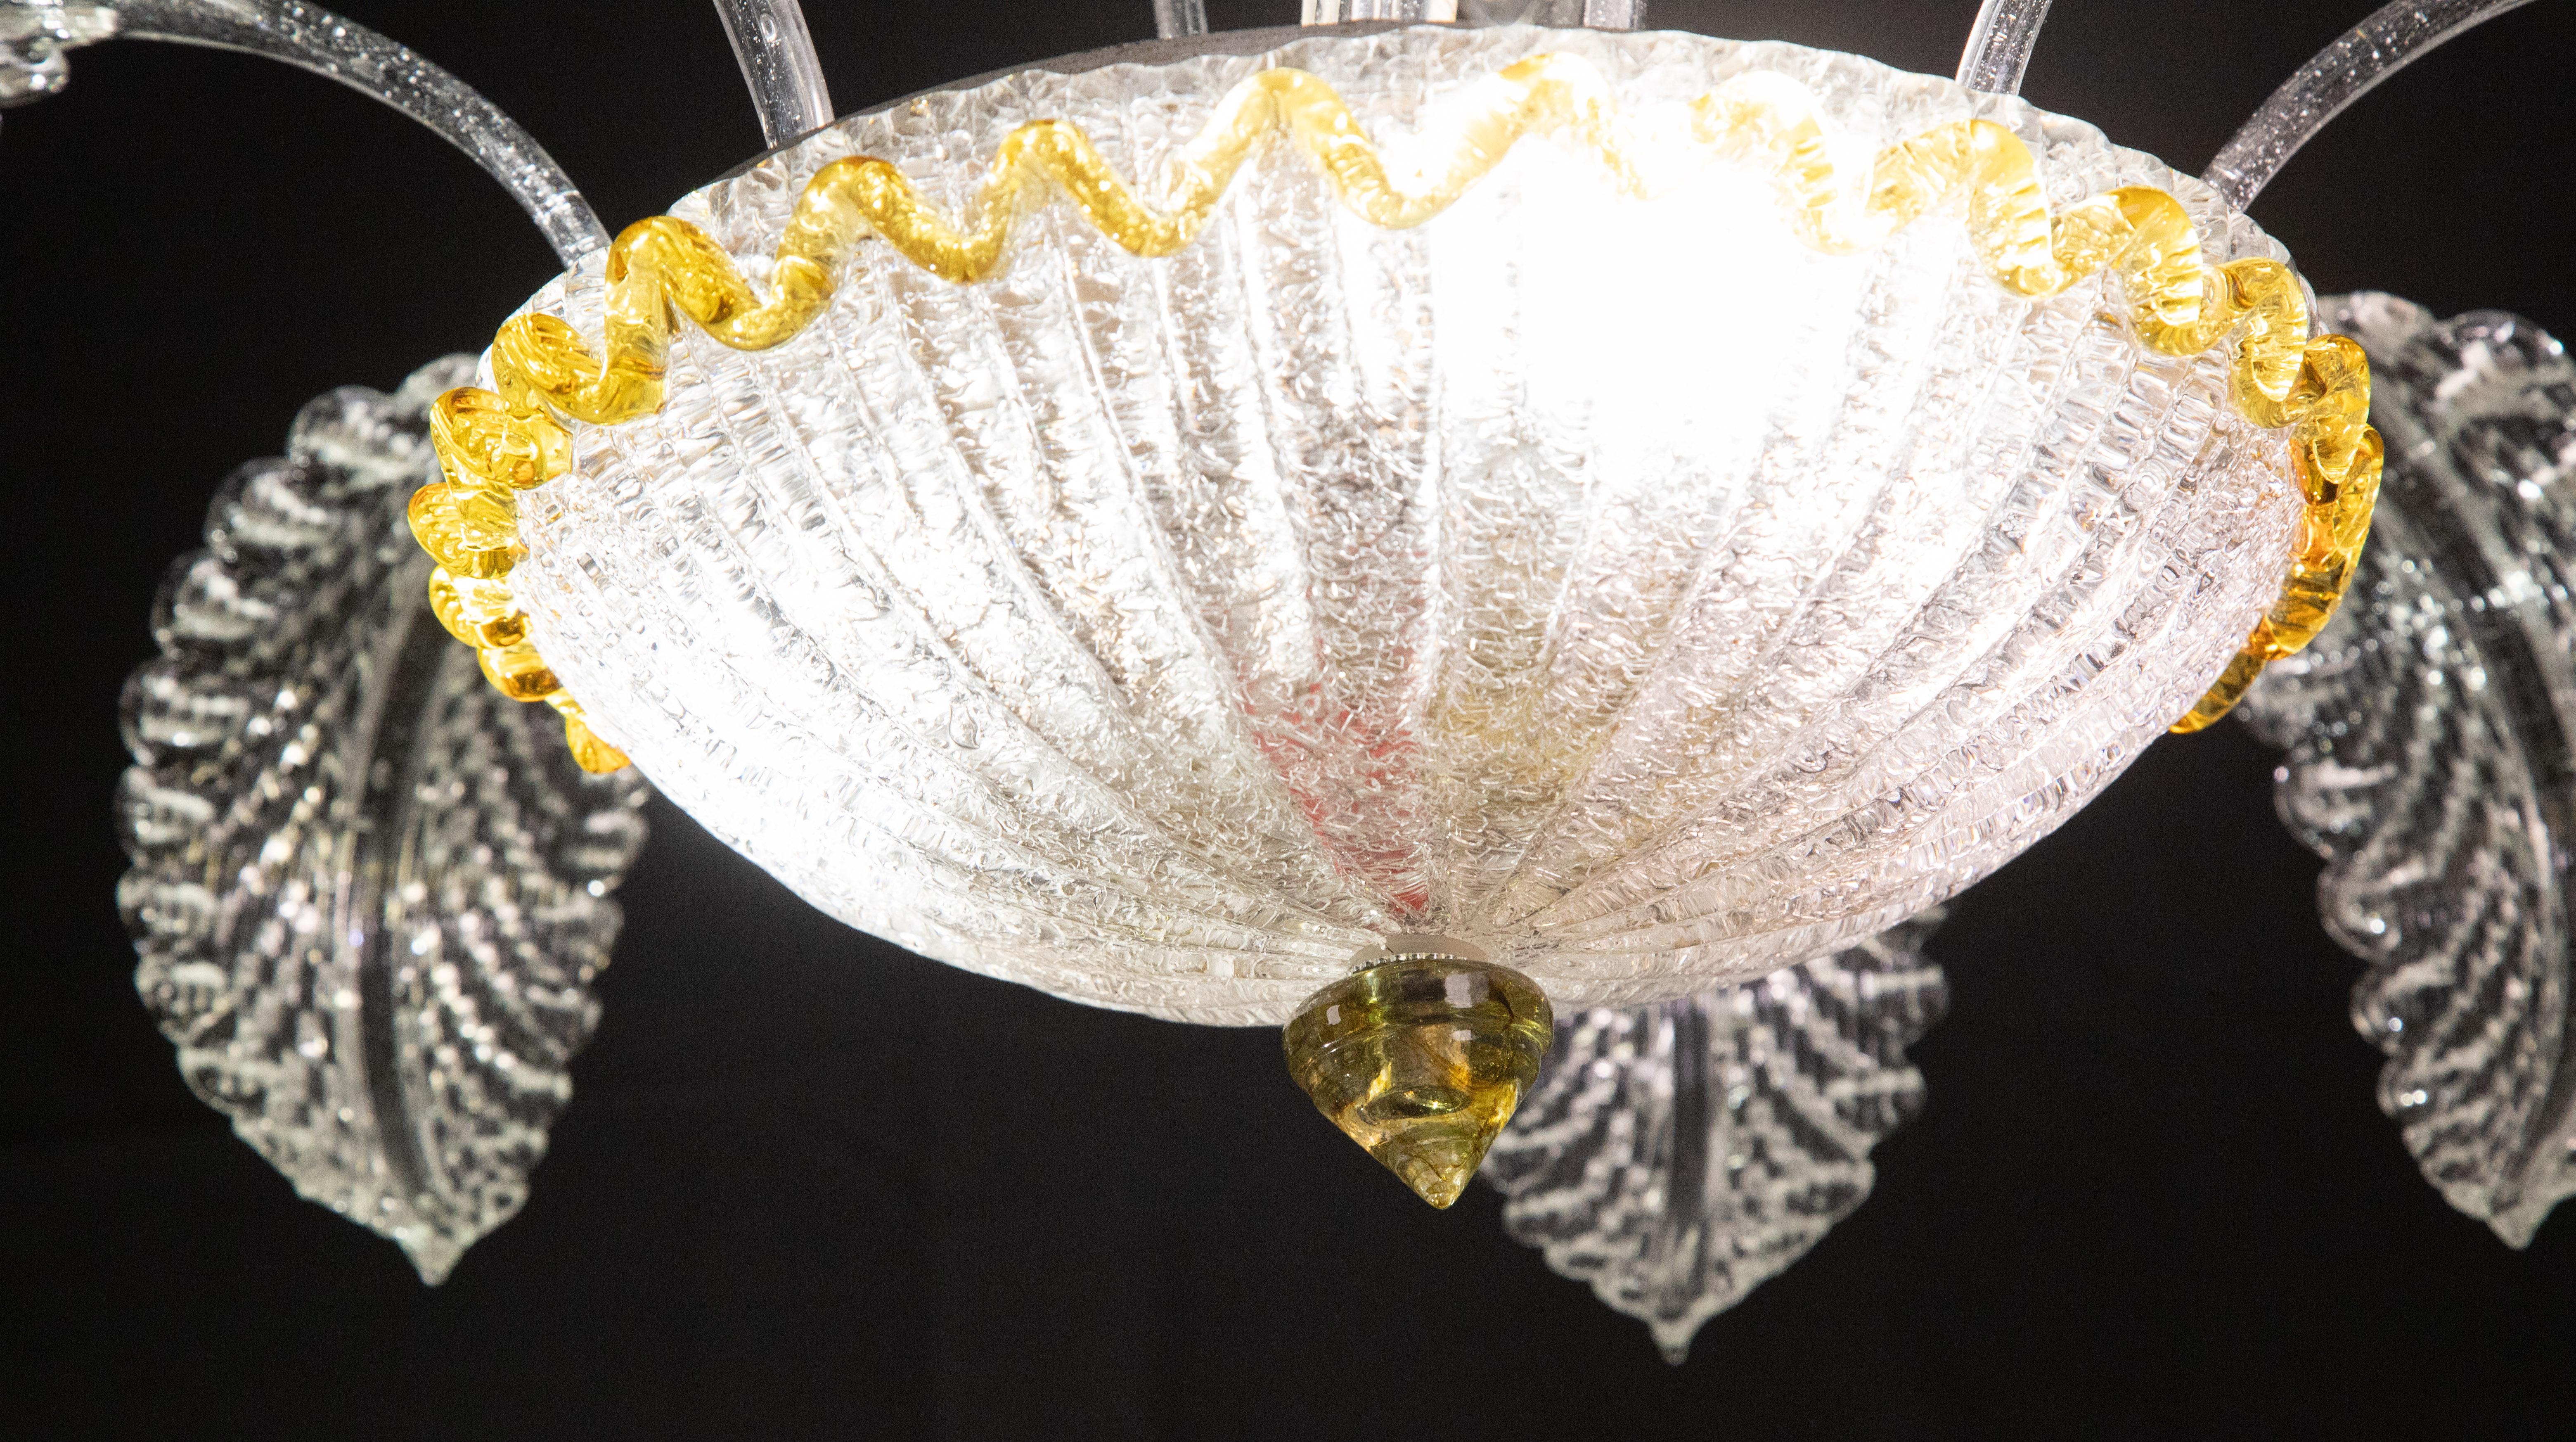 Charming Yellow and Trasparent Pendant Light, Murano Glass, 1970s For Sale 2